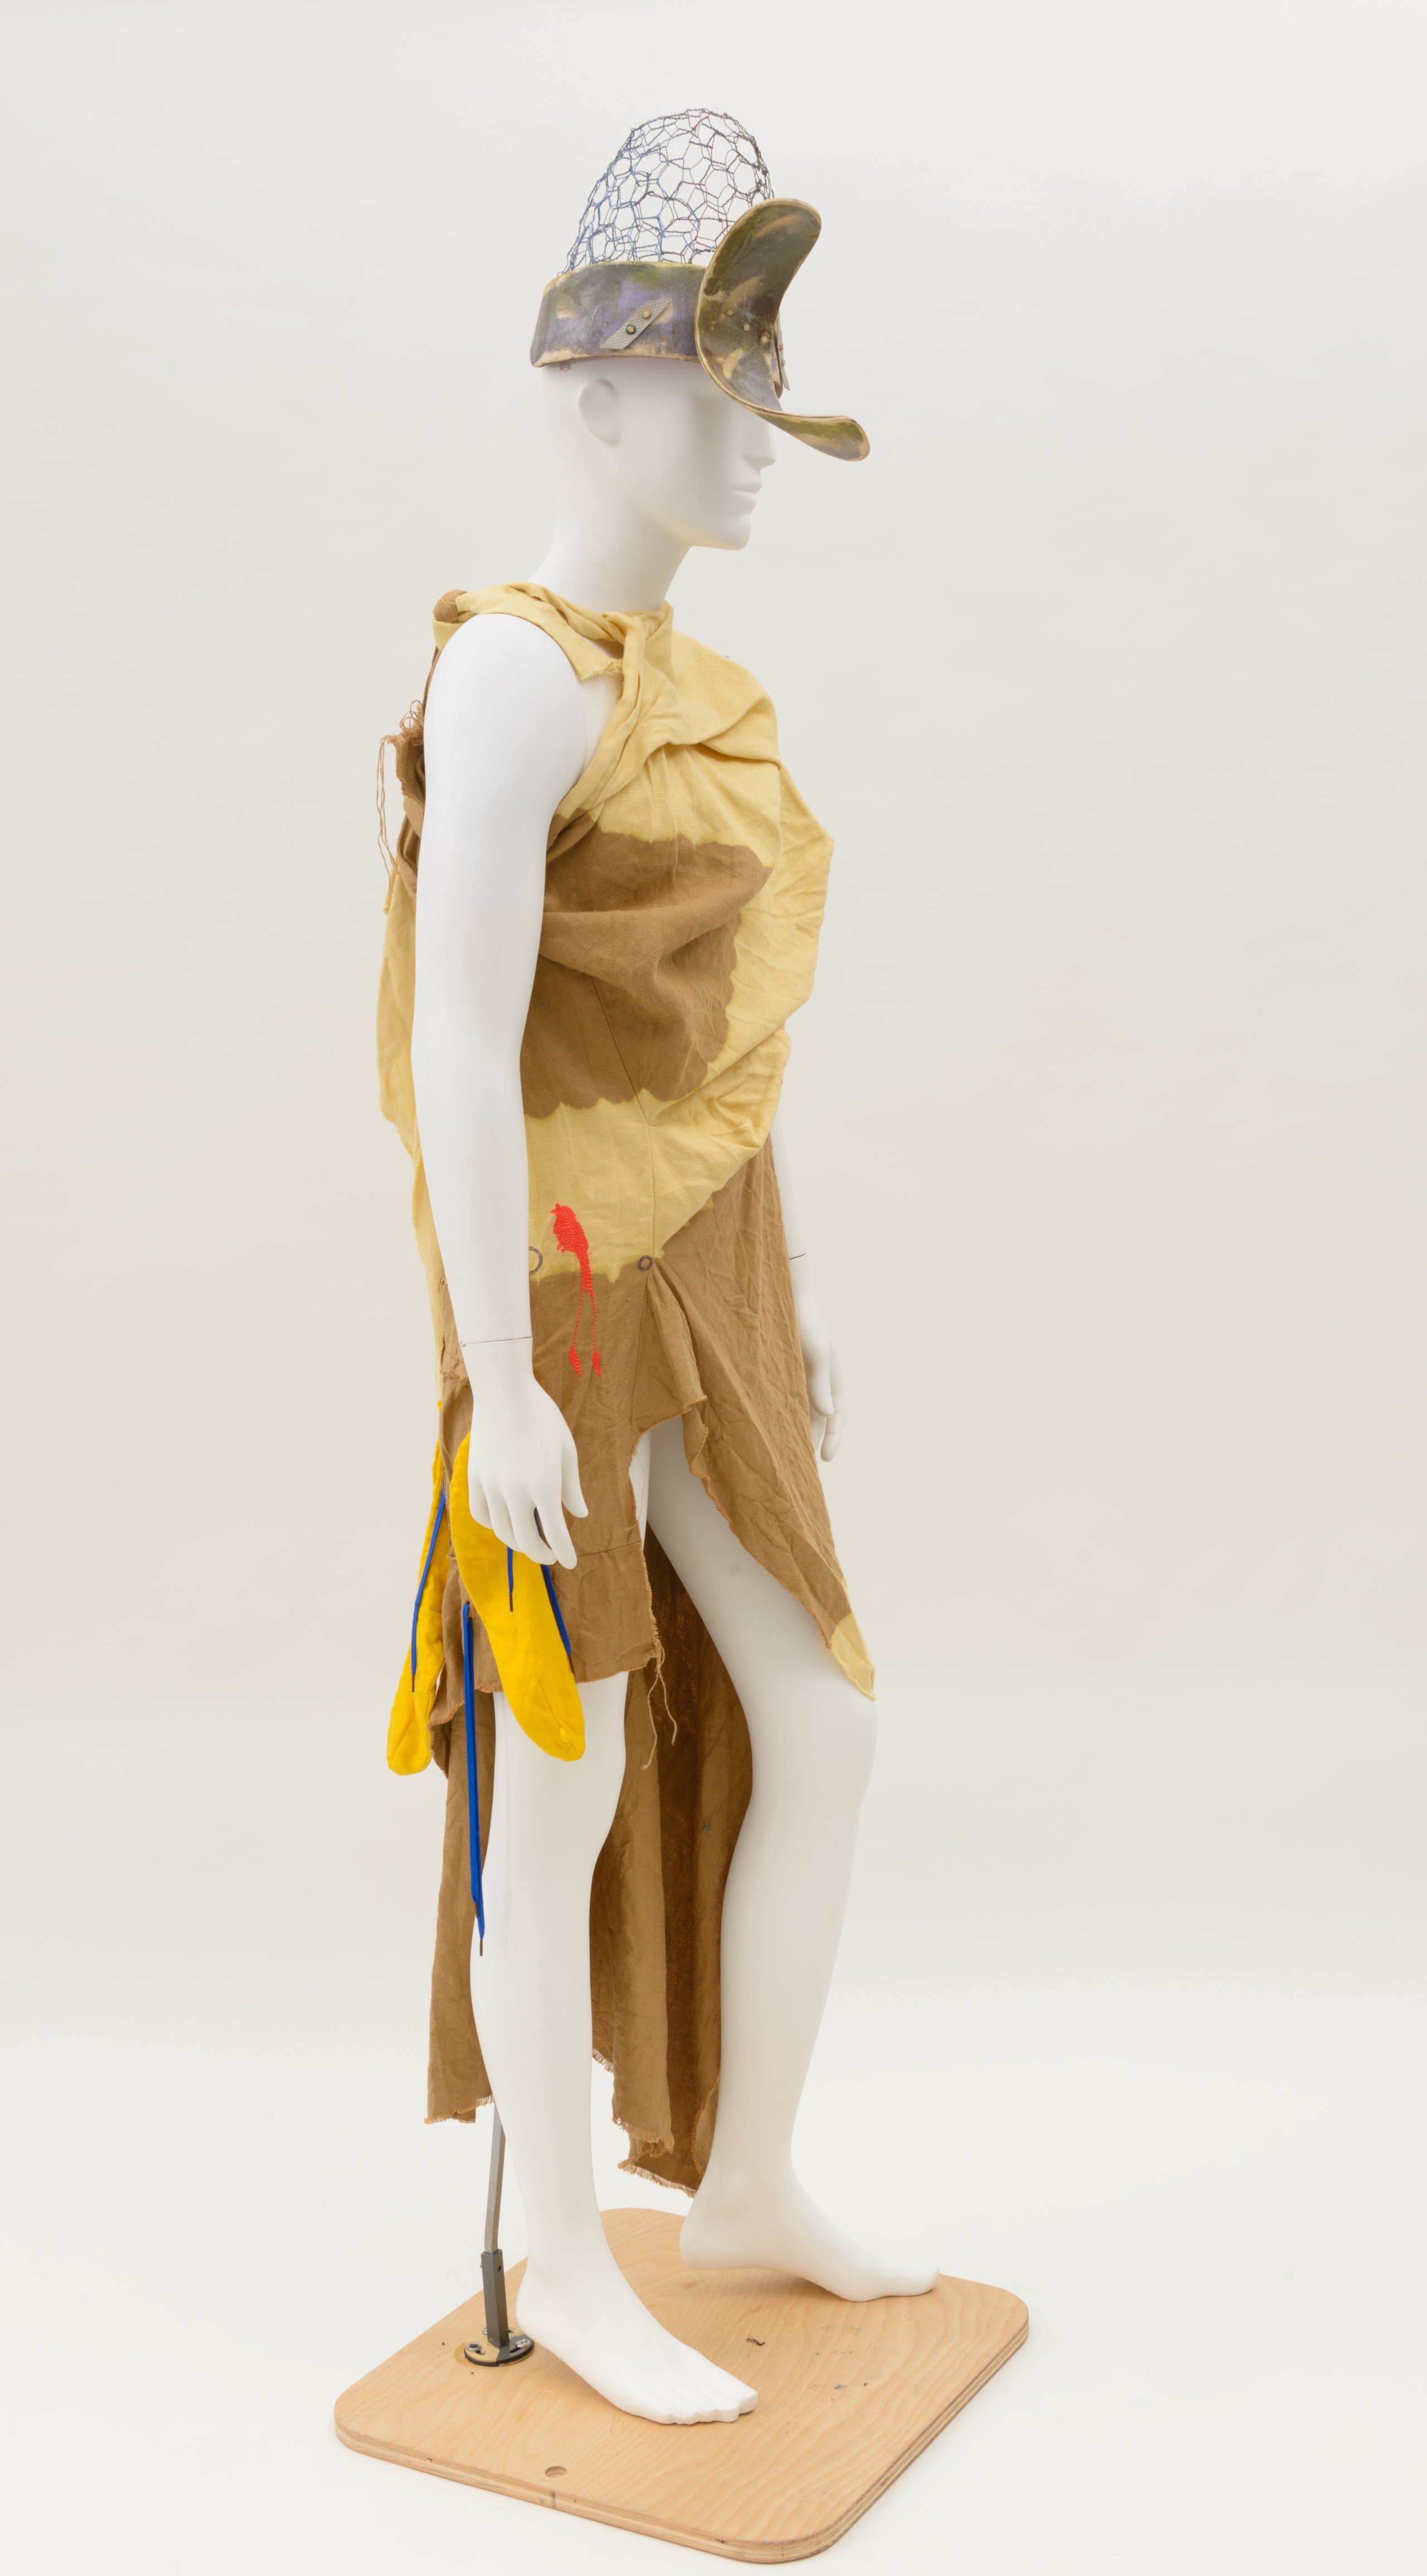 Dress, 'FIGURES IN LANDSCAPE' by Bernhard Willhelm and headpiece by Duane Paul